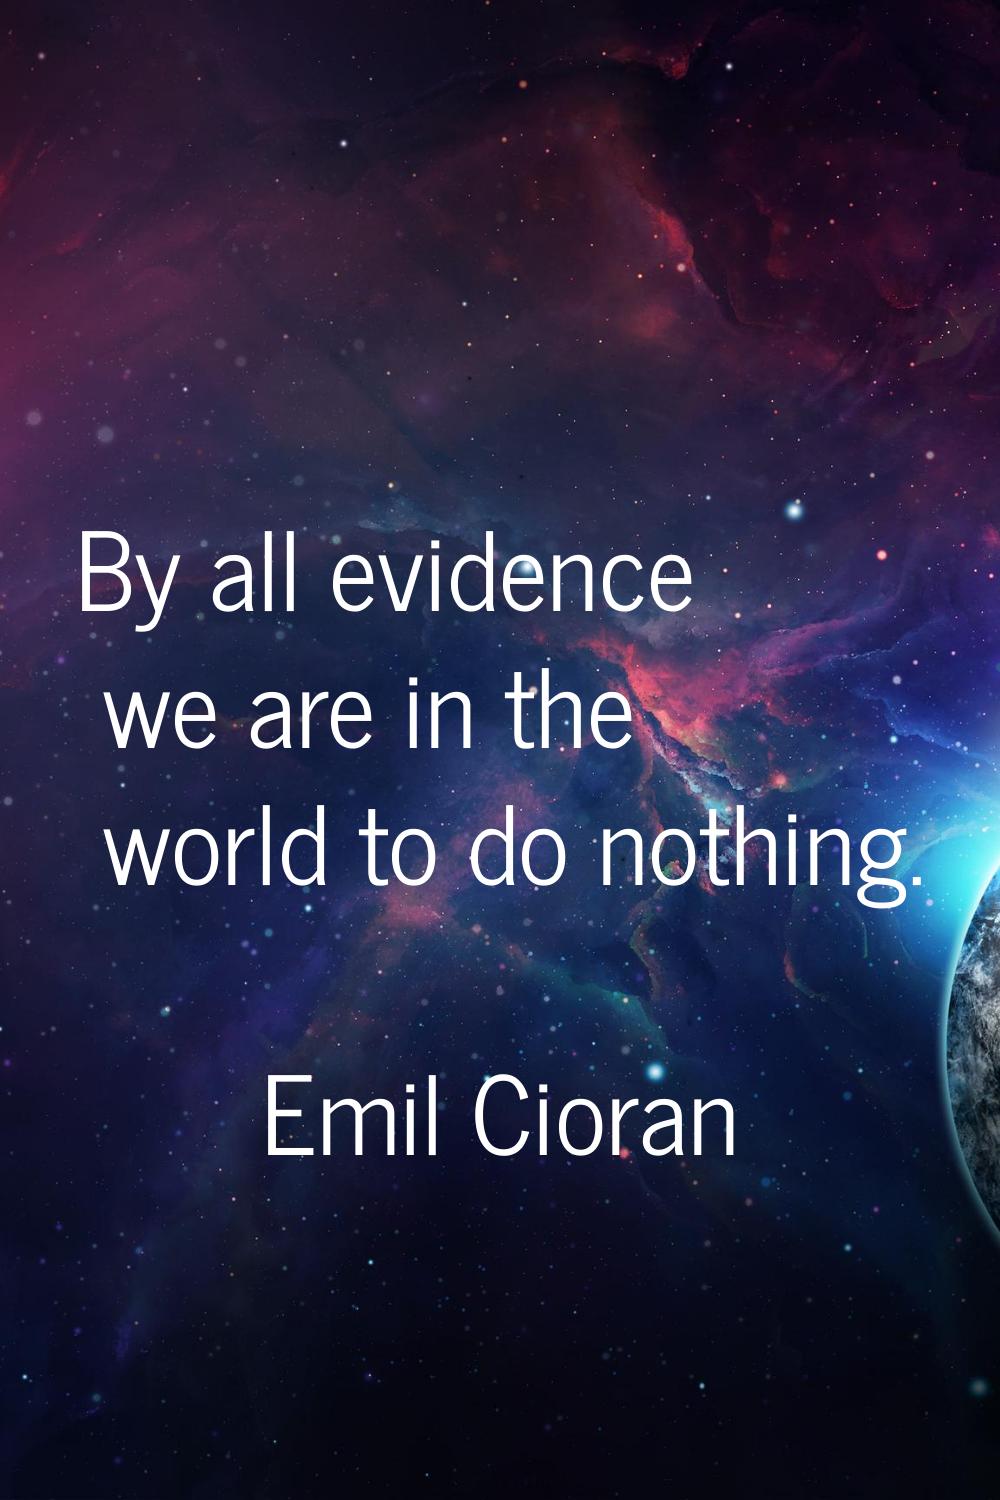 By all evidence we are in the world to do nothing.